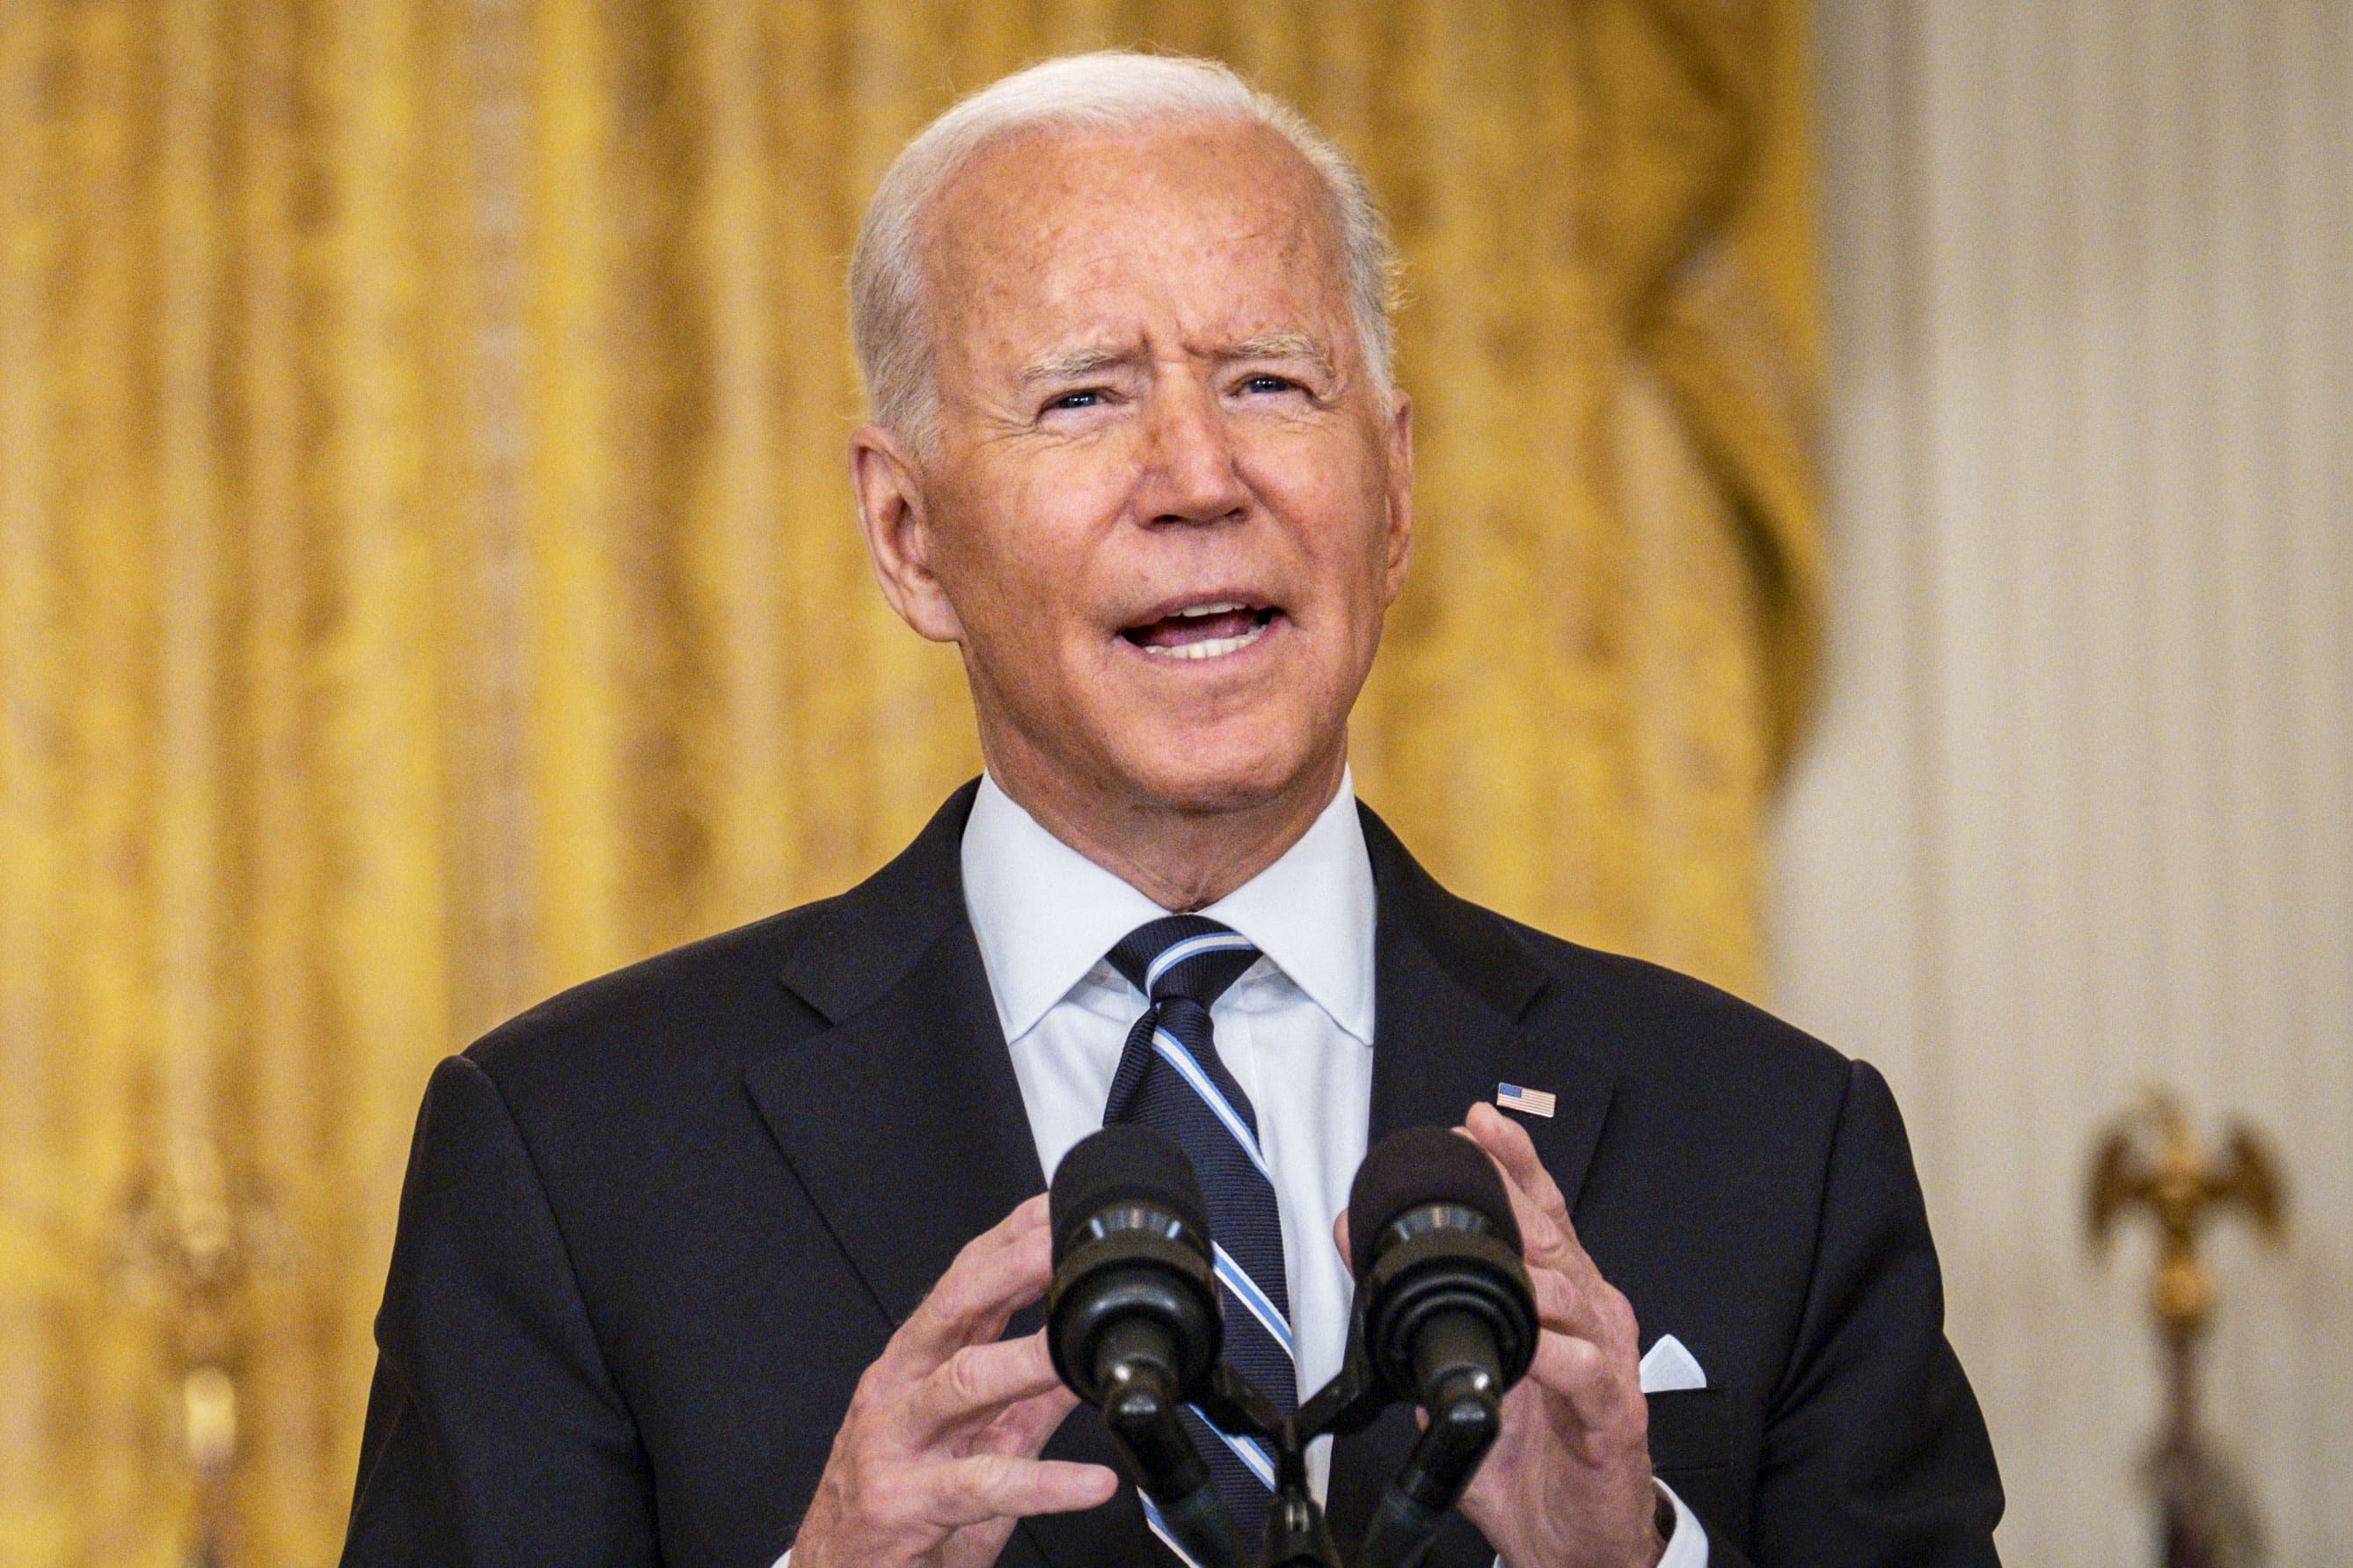 'Please get vaccinated now,' Biden urges after FDA approves Pfizer Covid shots